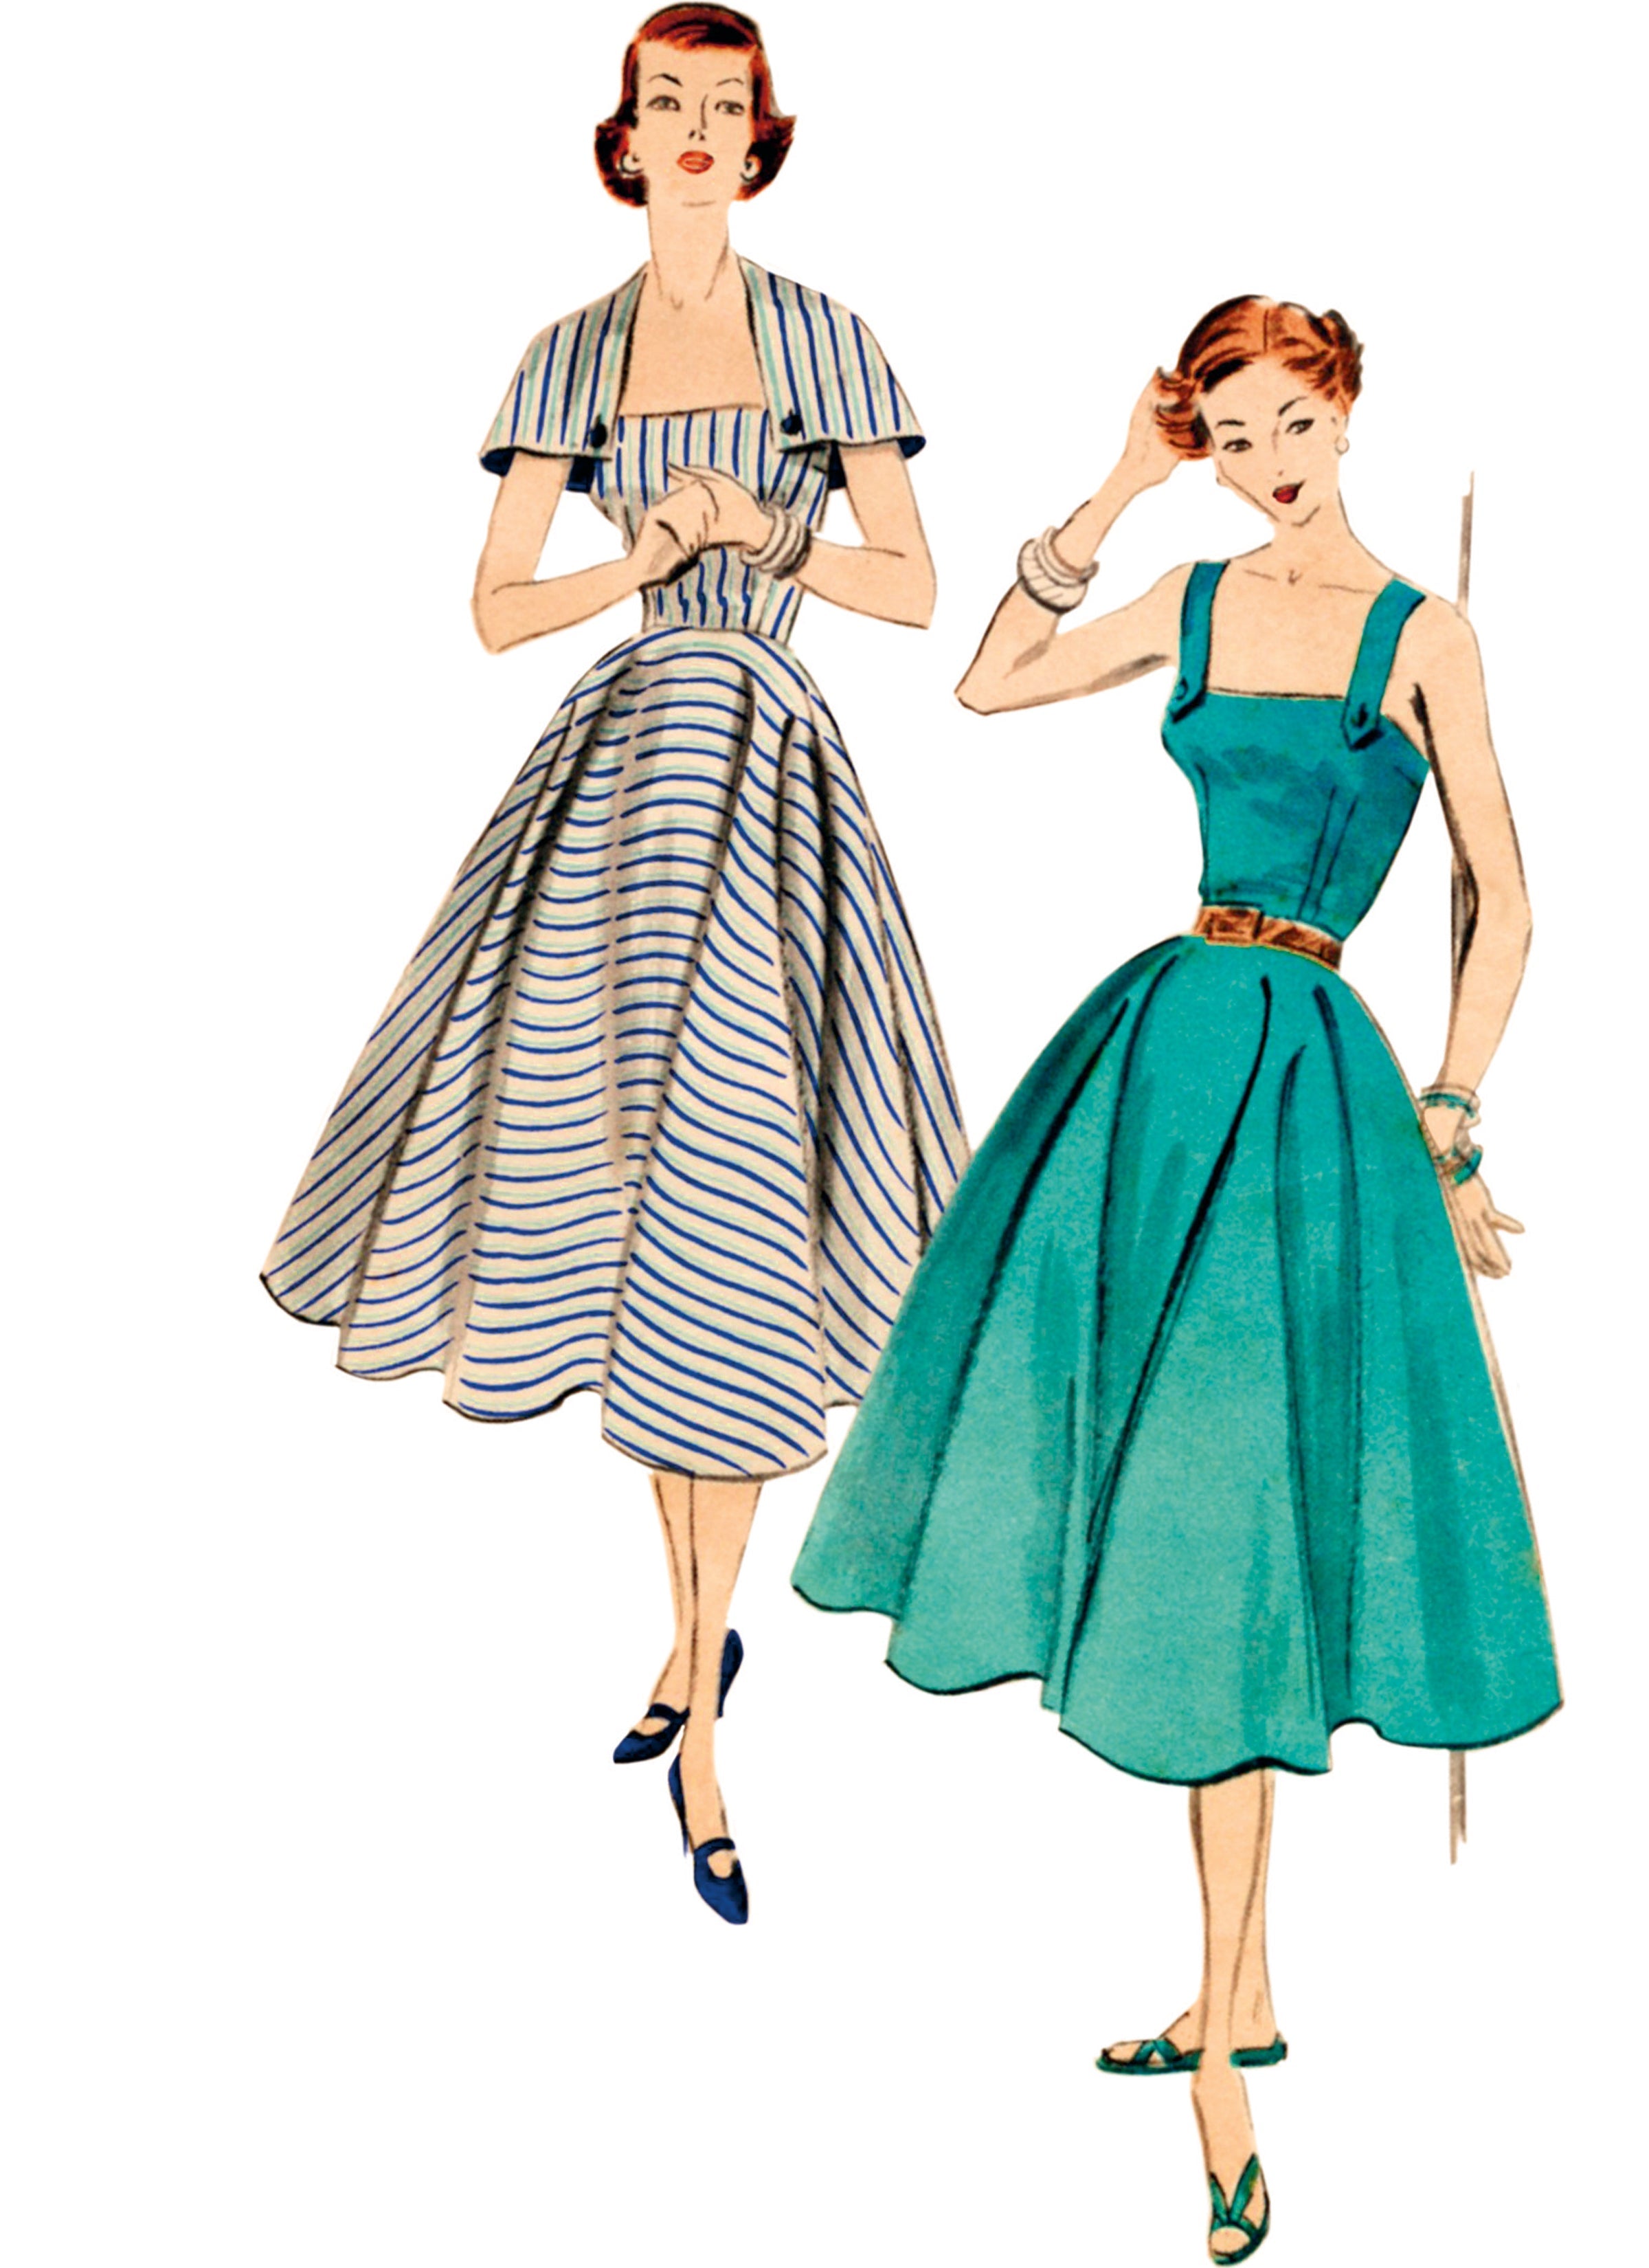 Vogue Sewing Pattern 2002 Vintage 1950's Dress and Capelet from Jaycotts Sewing Supplies